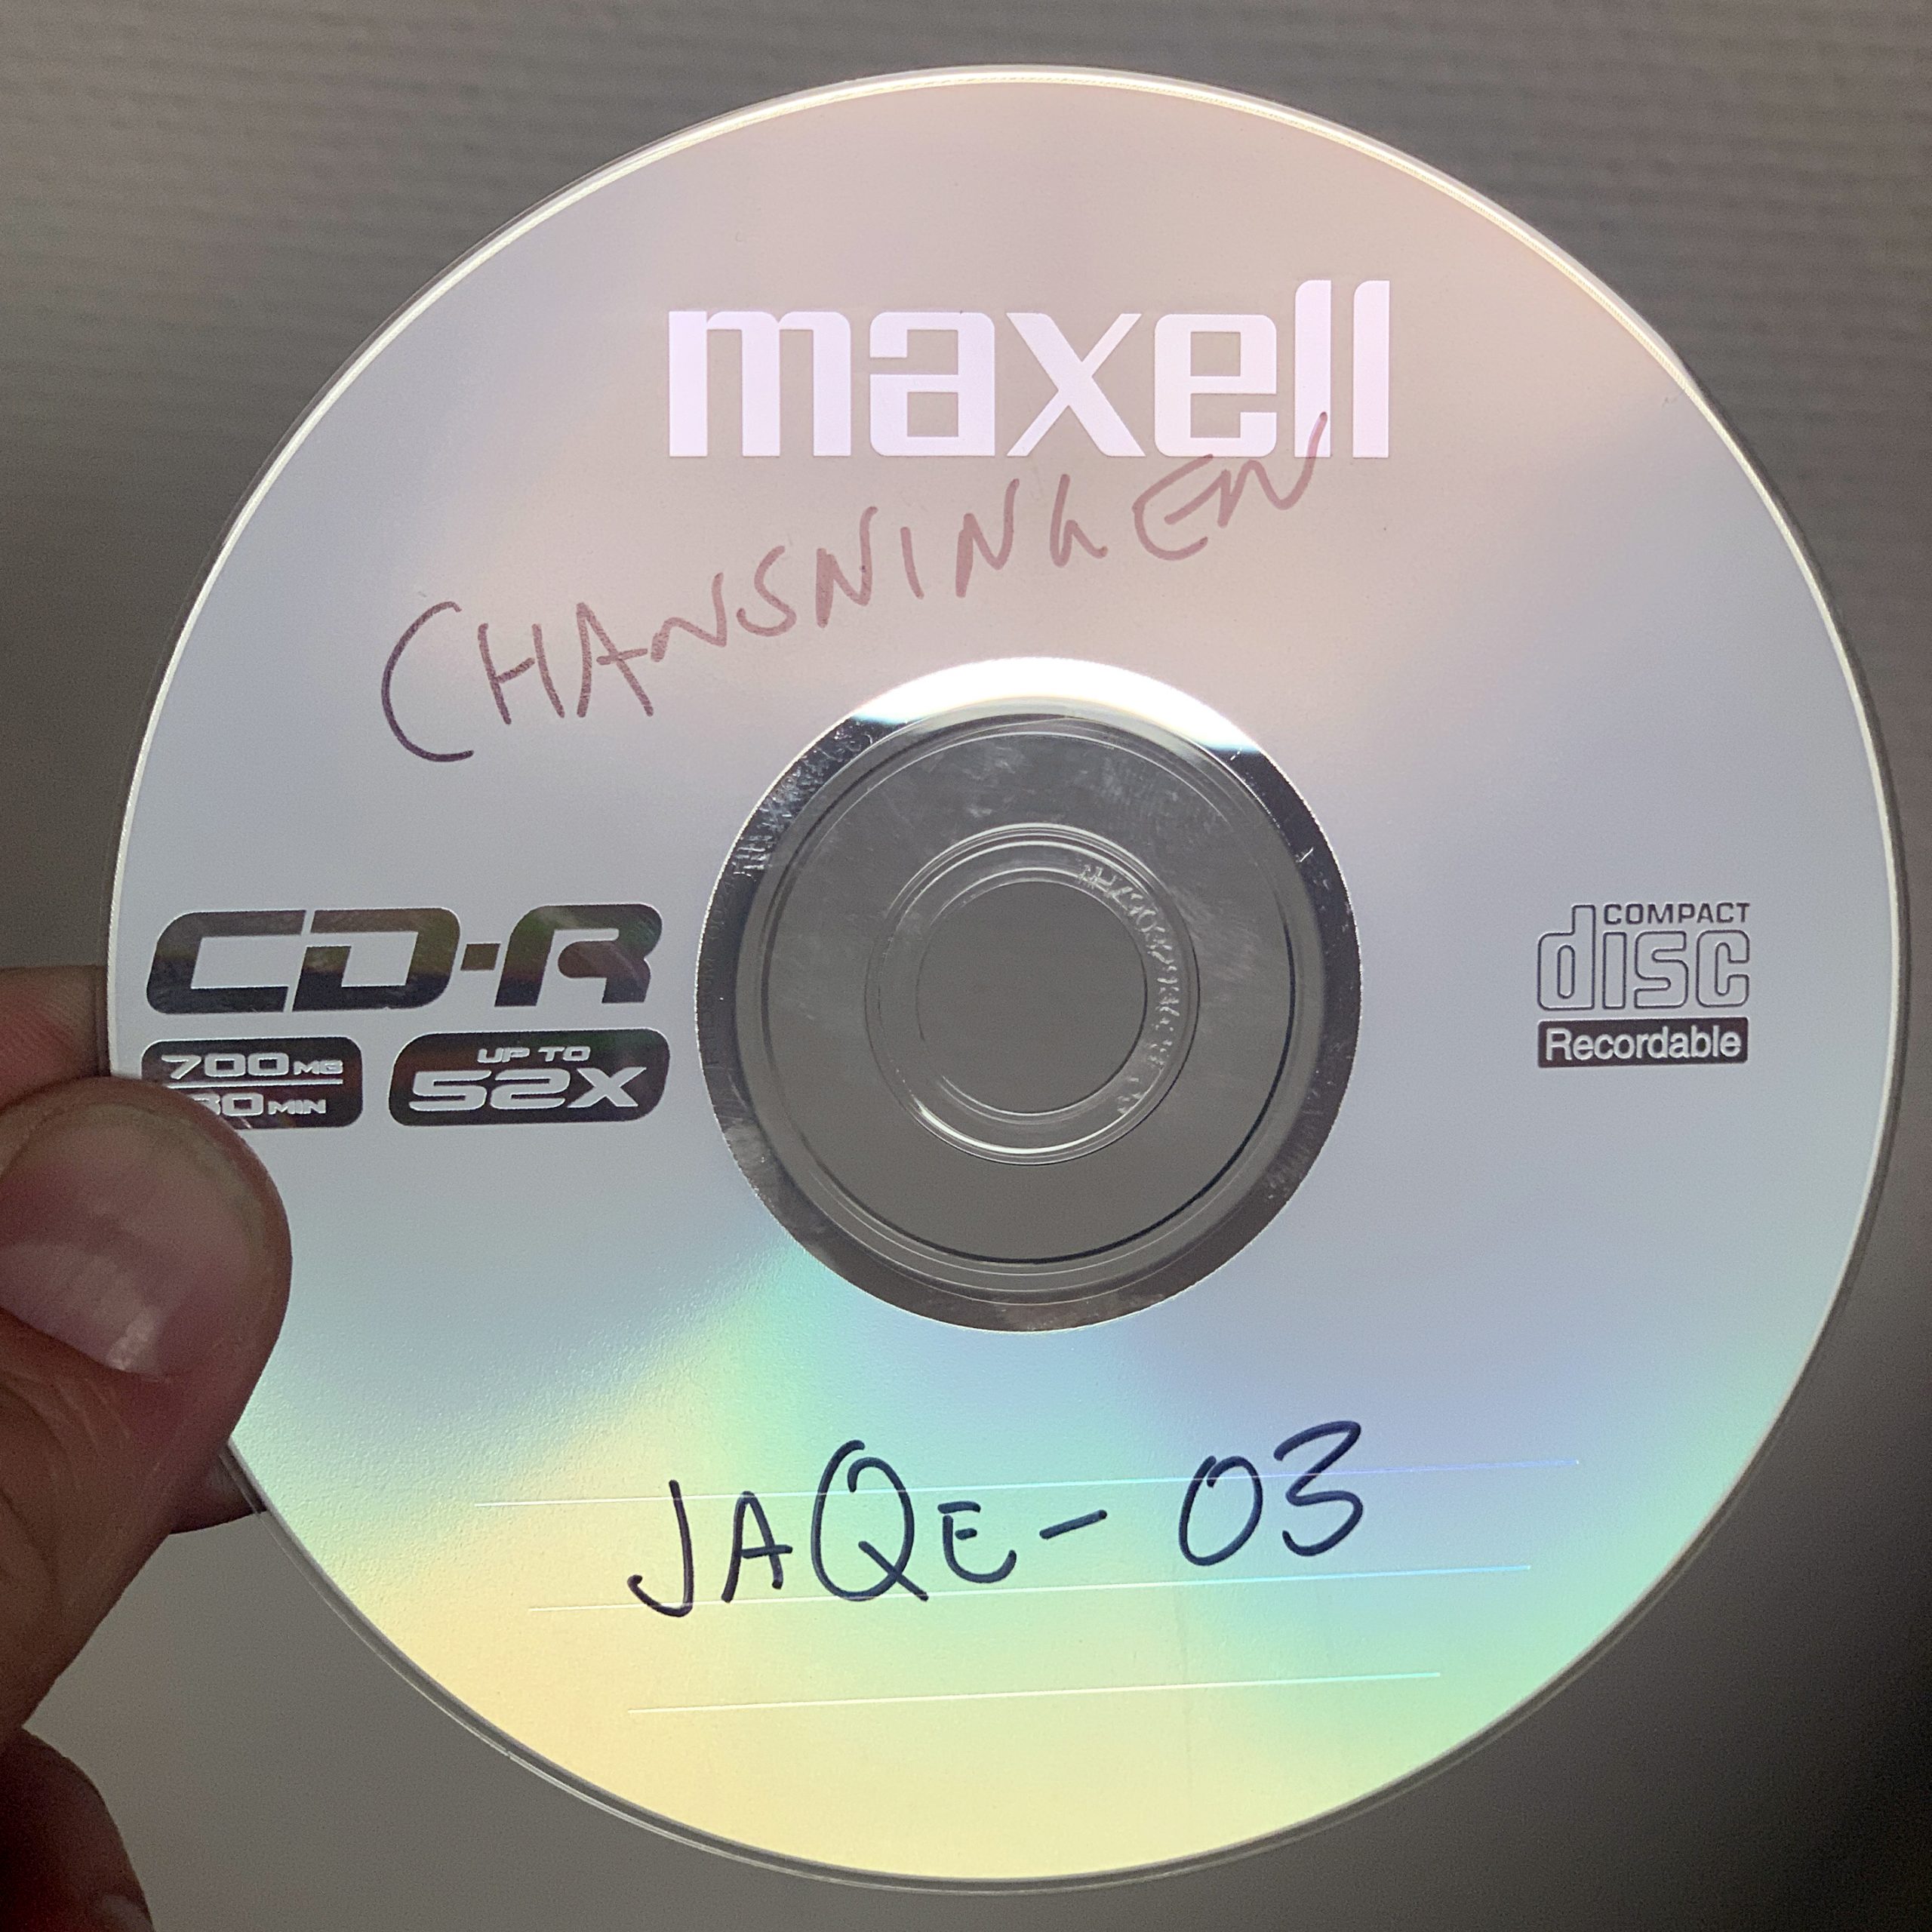 Jaqe – 03 [mp3, 2004]